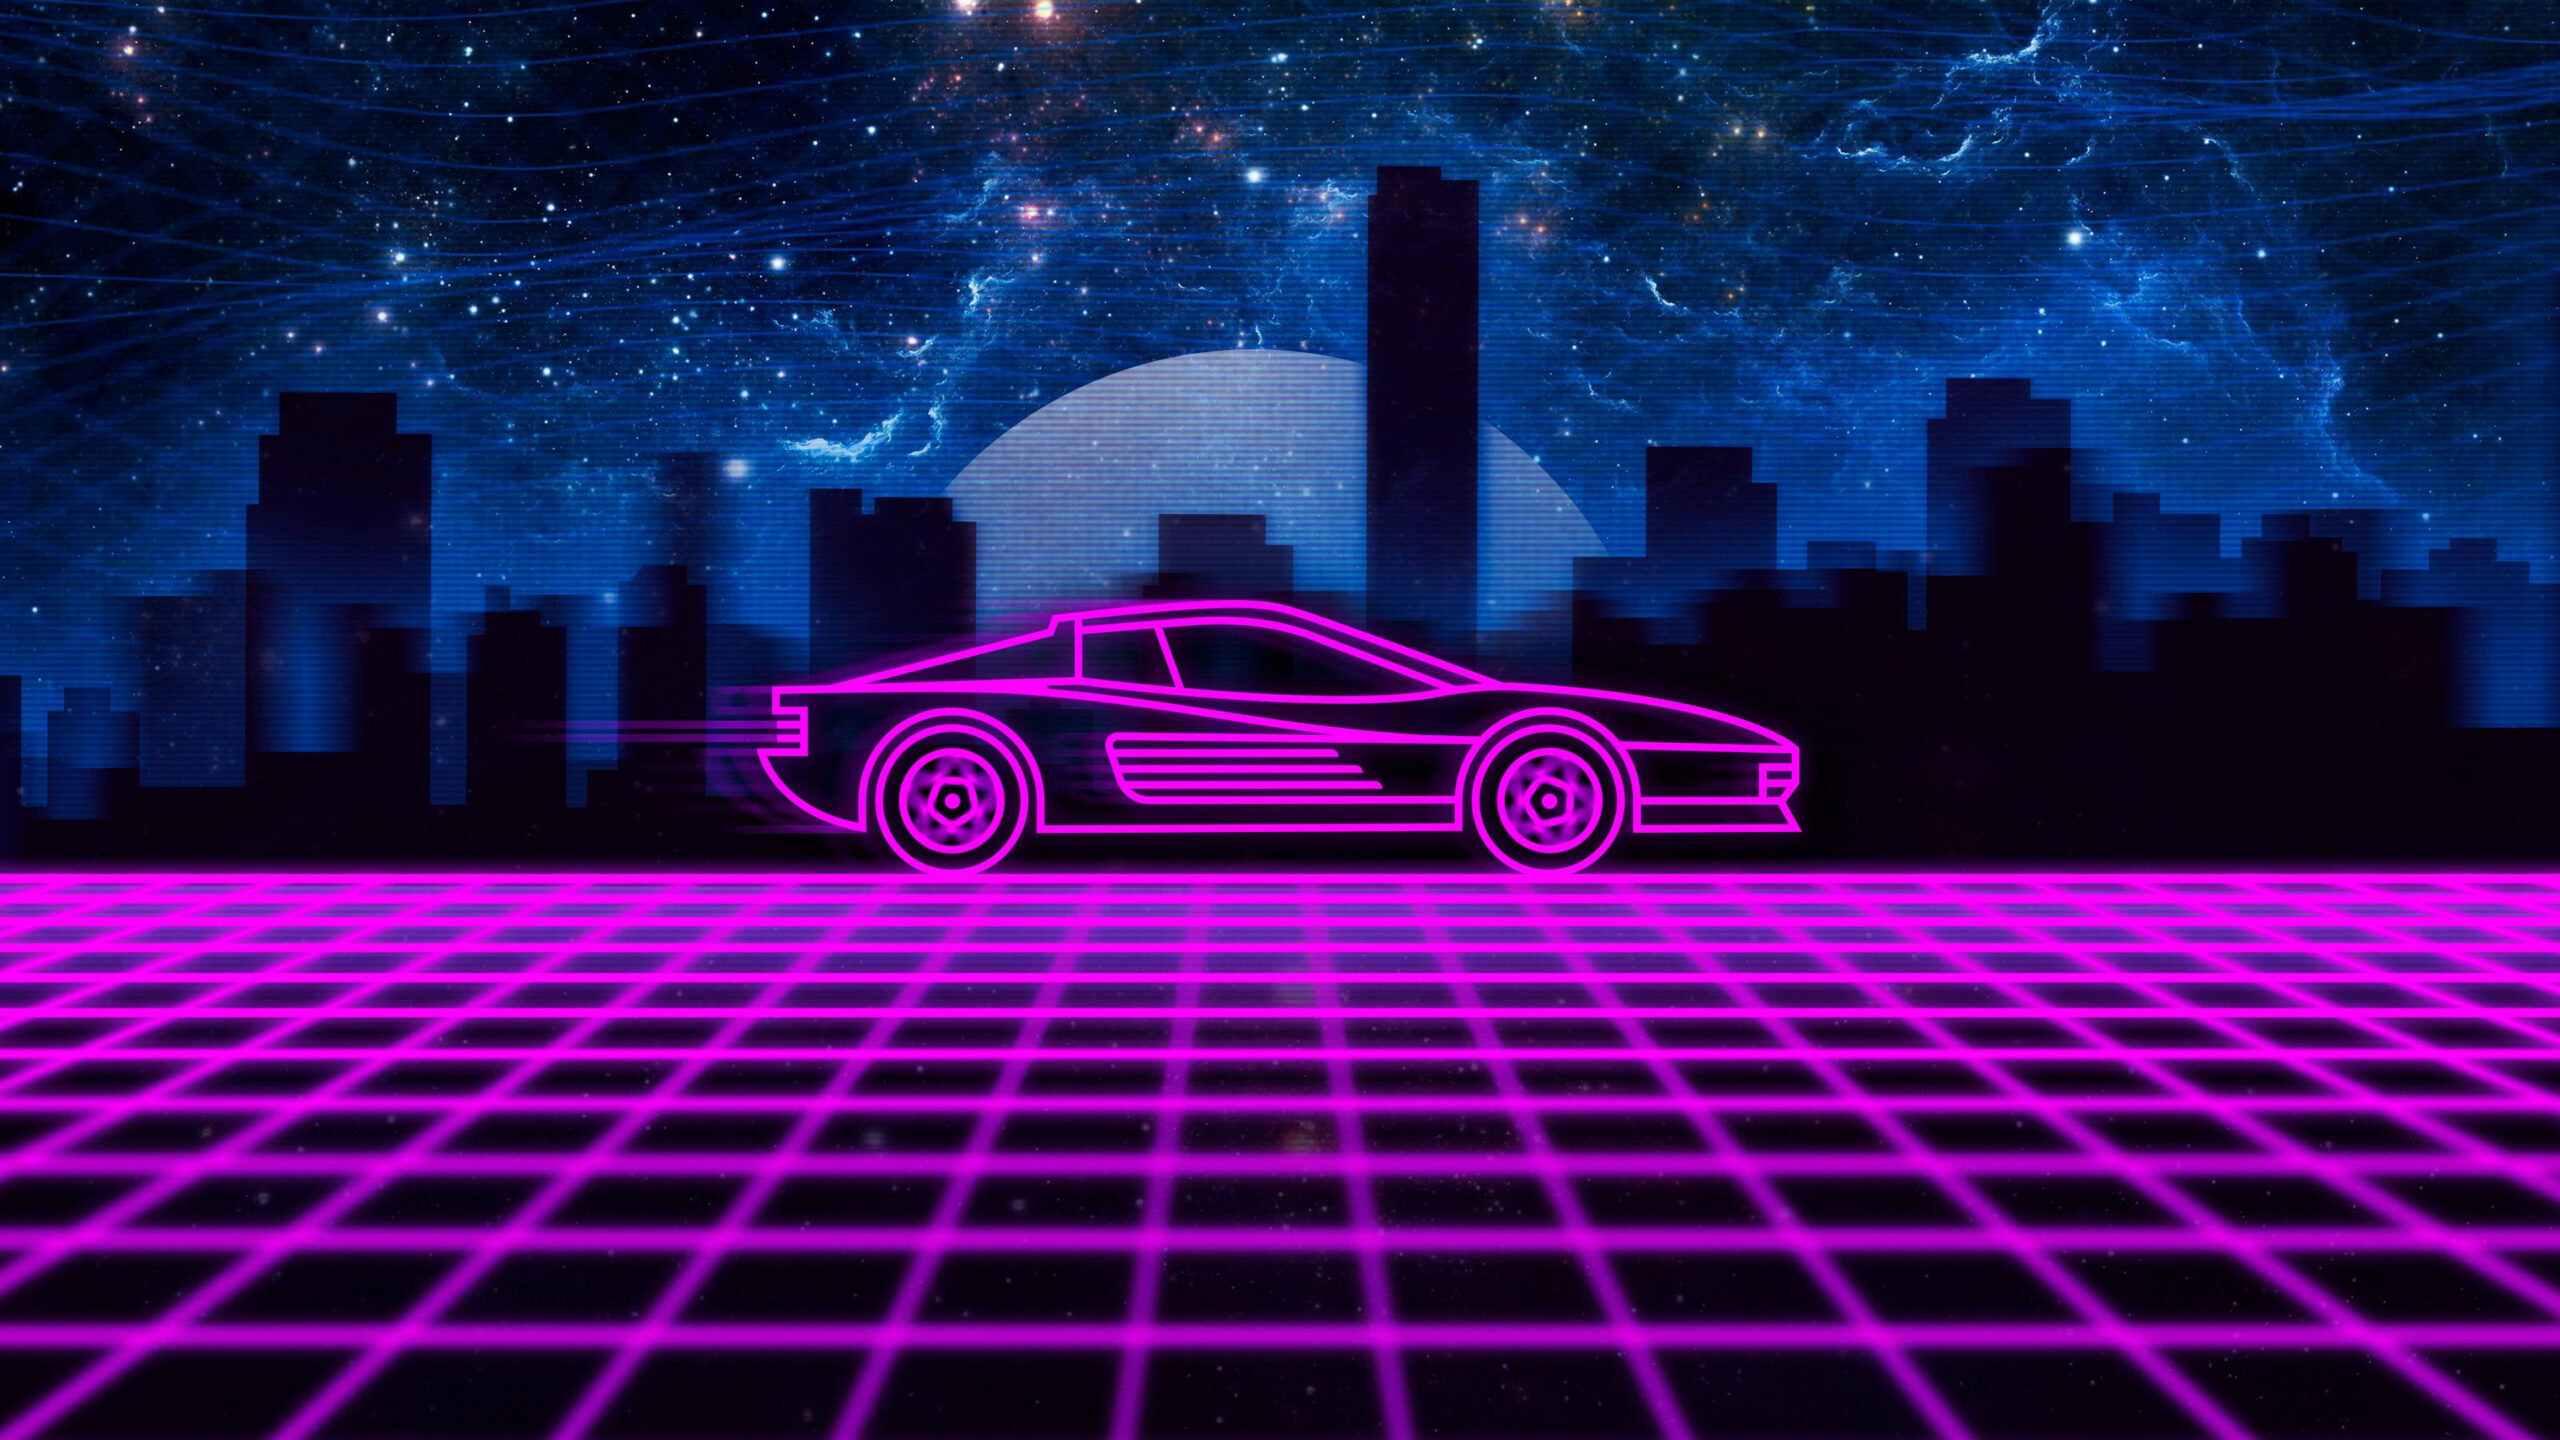 Ferrari Testarossa With Retrowave In Wallpaper Of High Rising Buildings Shadow And Sky With Stars K 2K Vaporwave